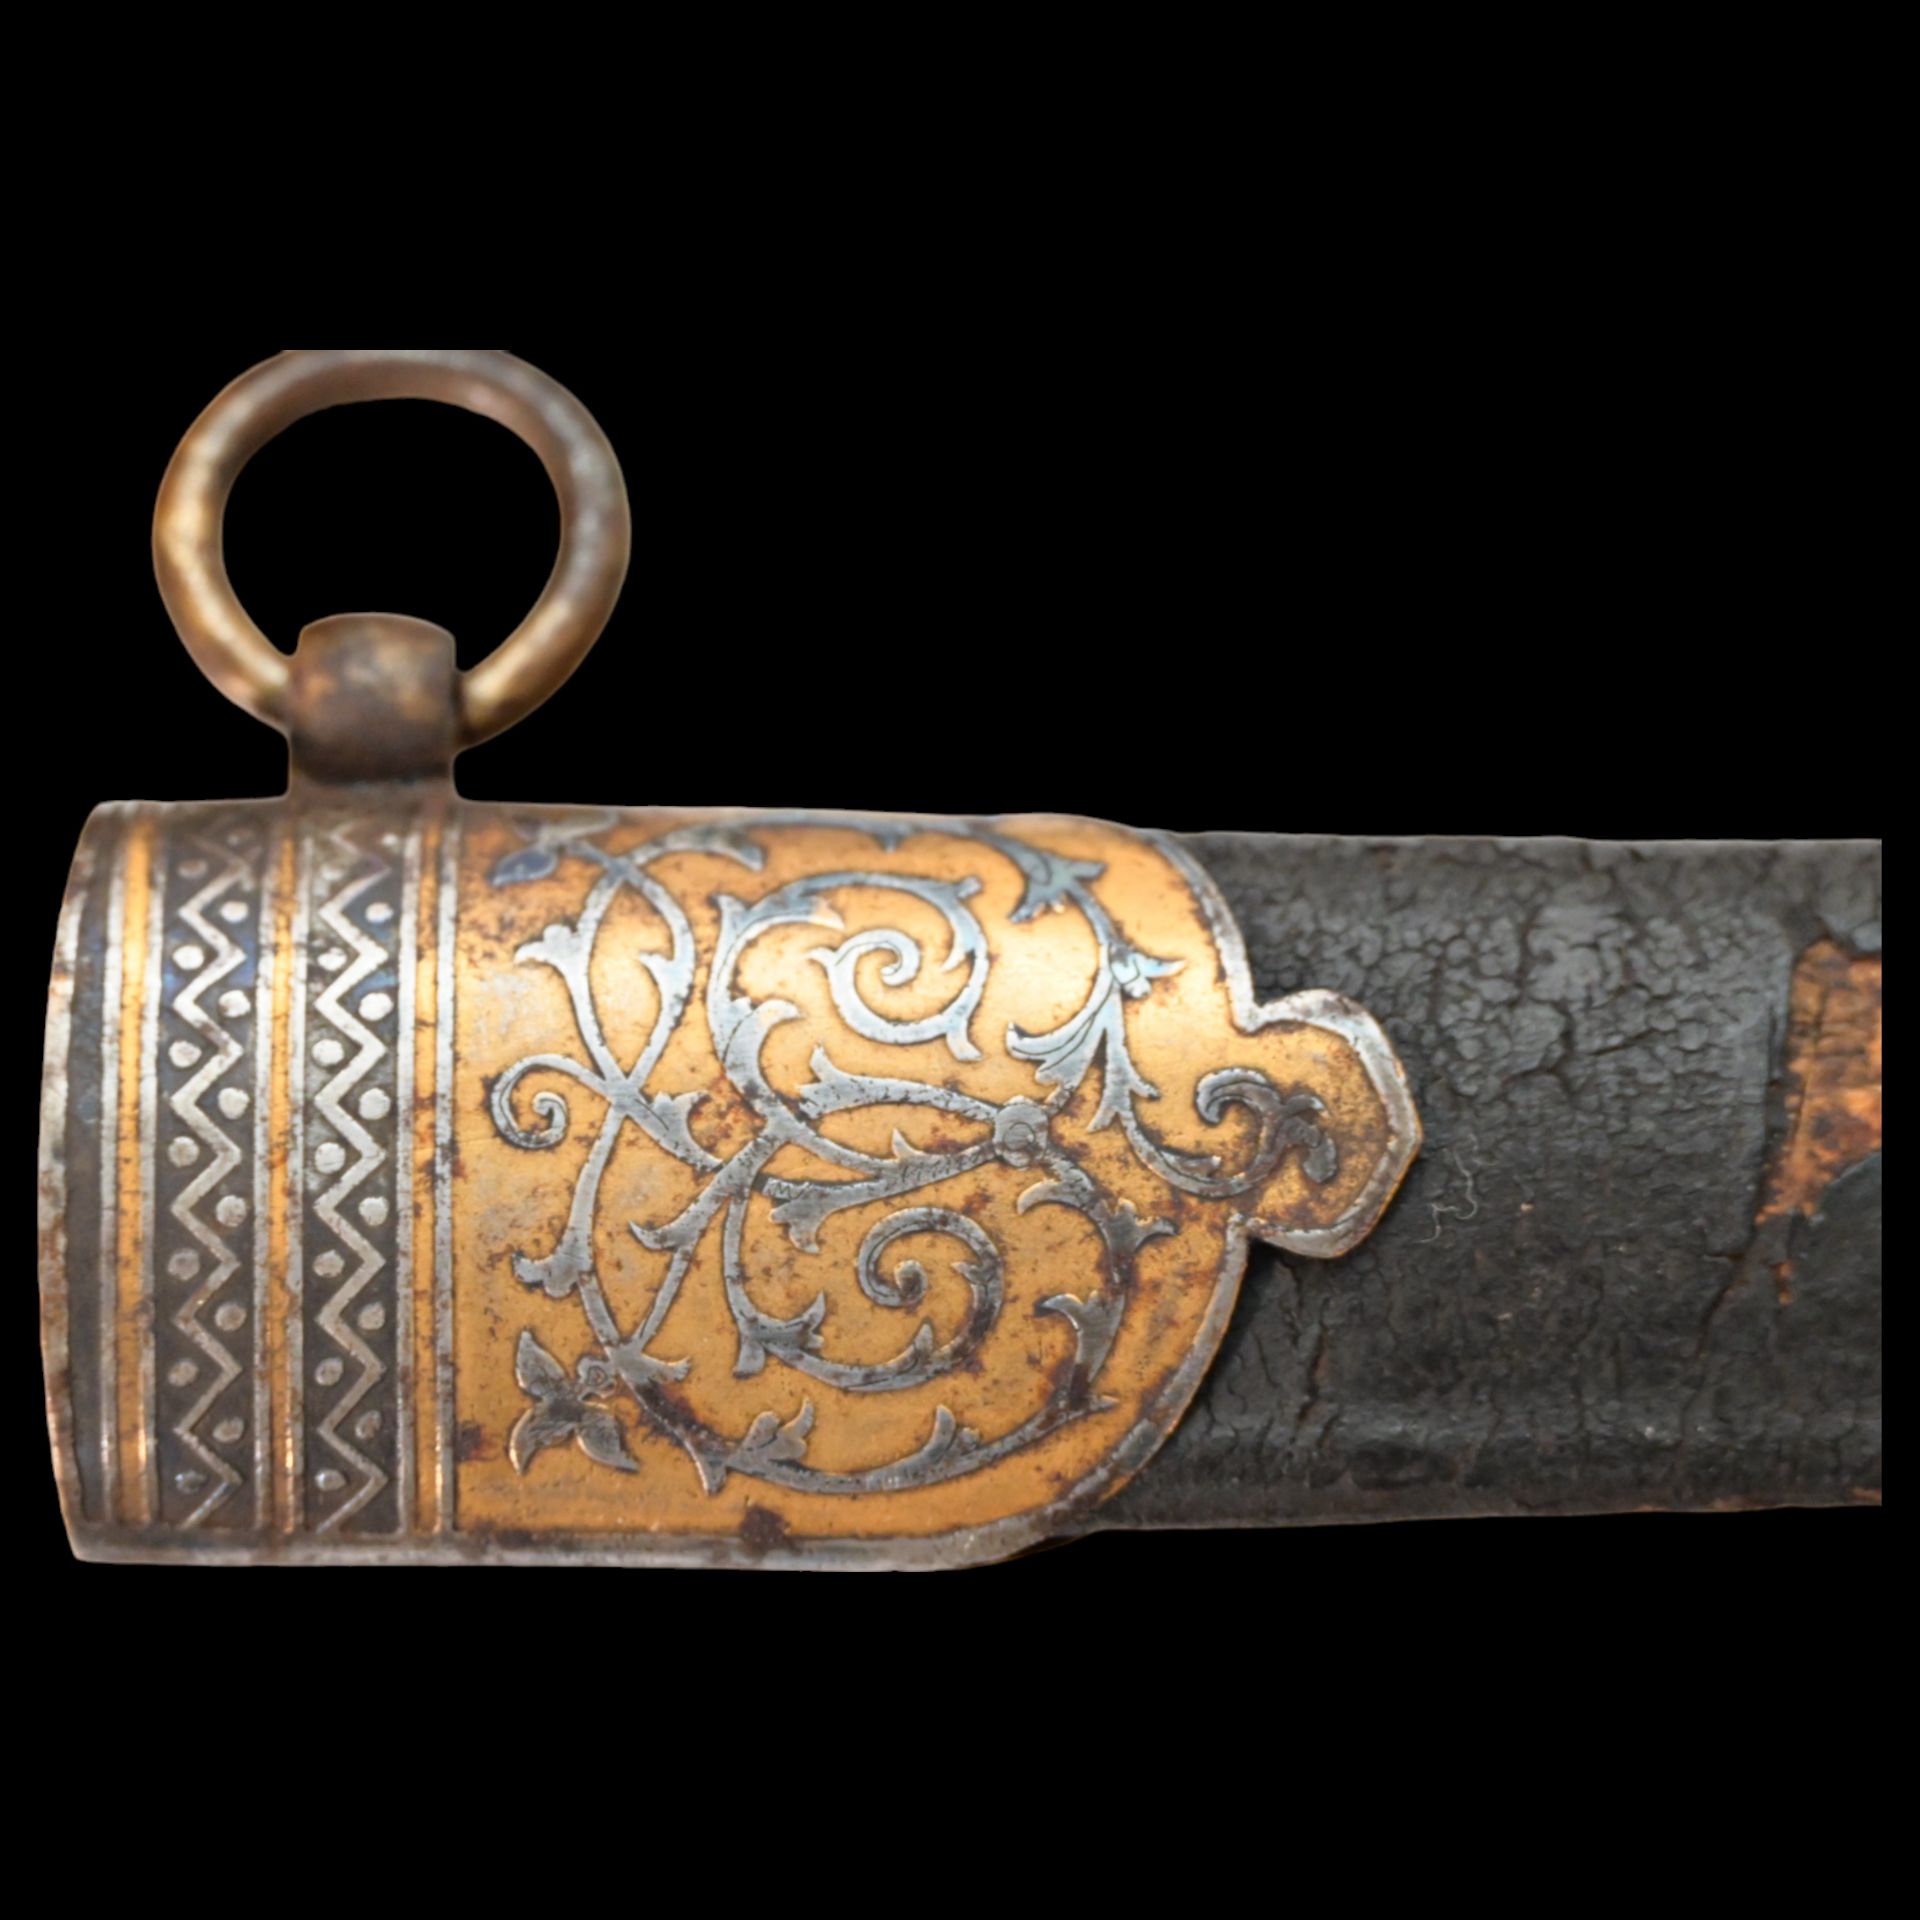 RARE HUNTING KNIFE, DECORATED WITH GOLD AND BLUE, RUSSIAN EMPIRE, ZLATOUST, 1889. - Image 5 of 26